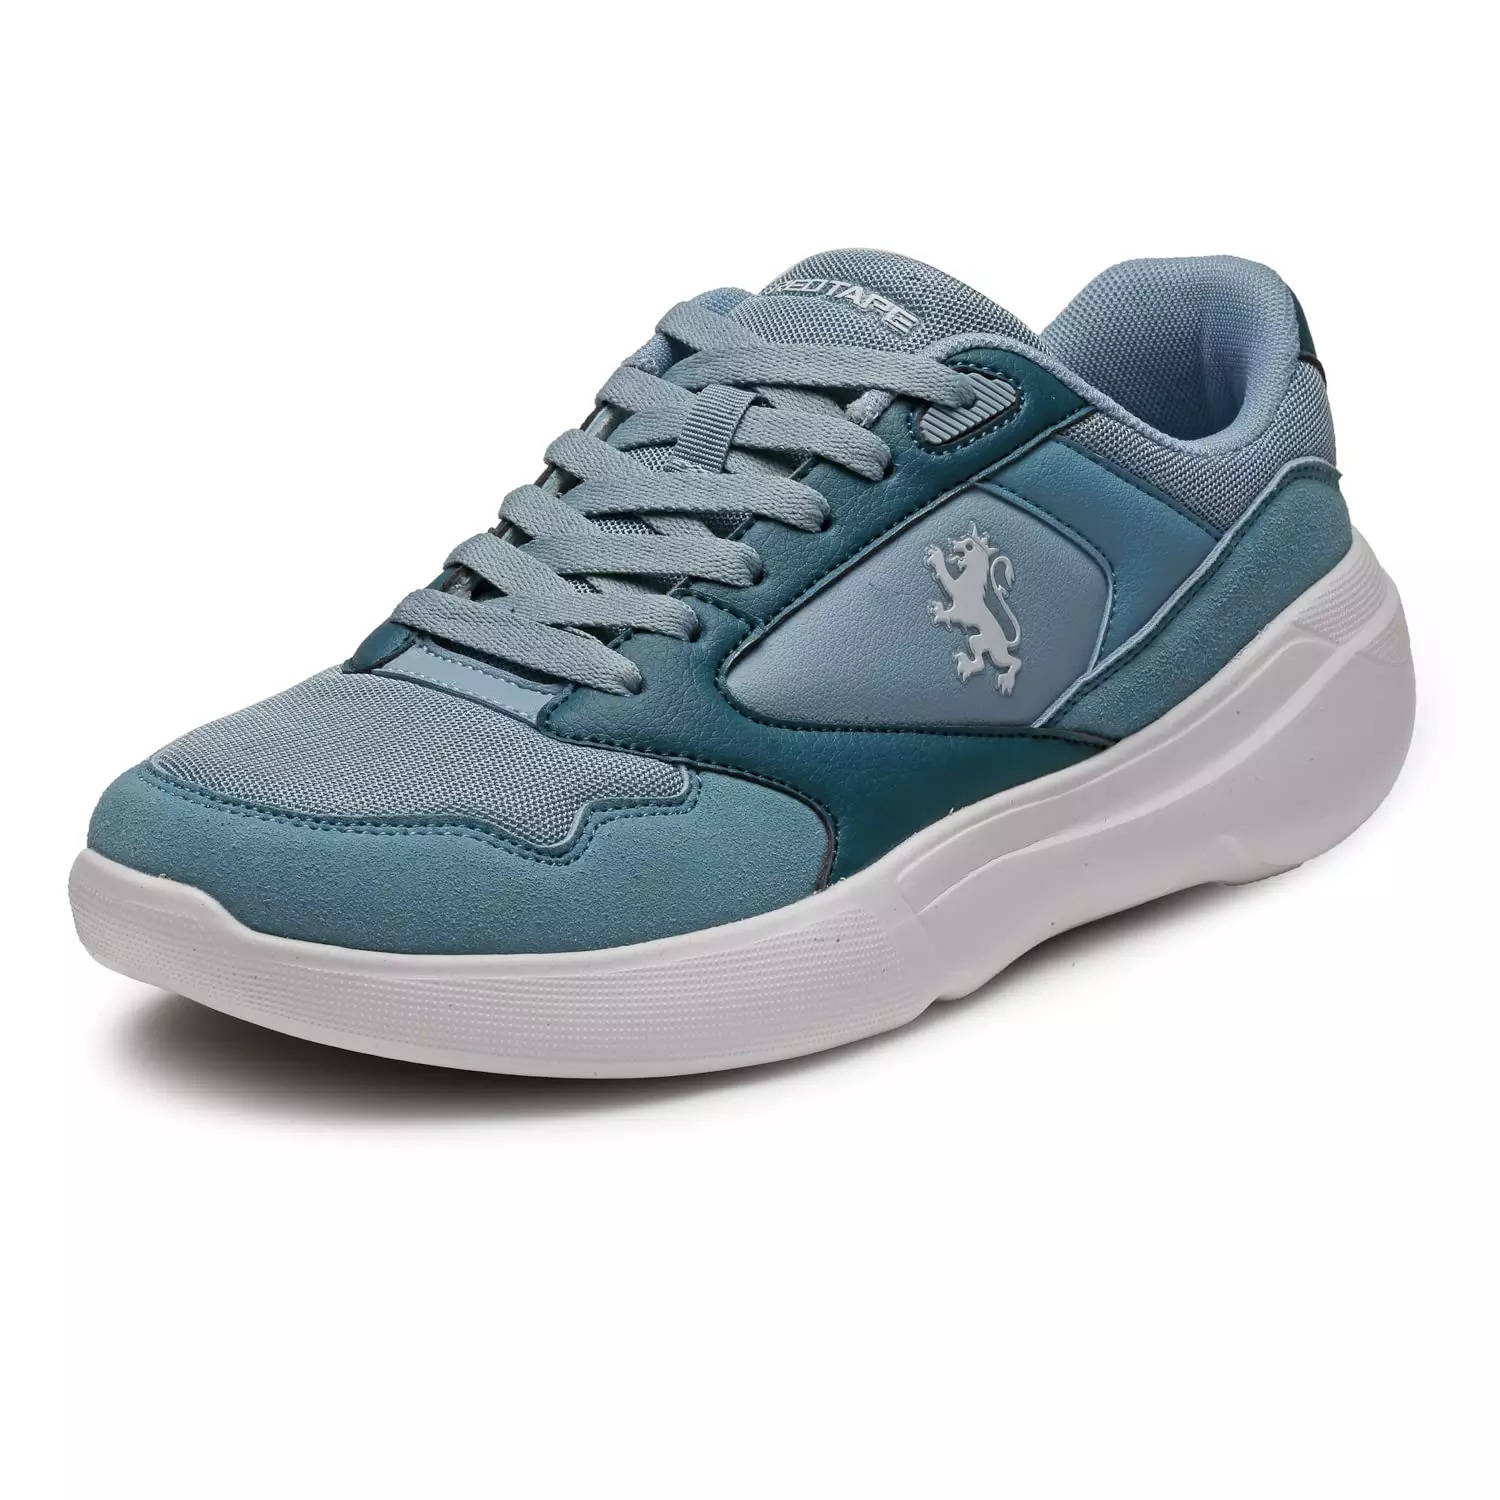 Buy RedTape Blue Sports Shoes for Men- Lace-Up Shoes, Perfect